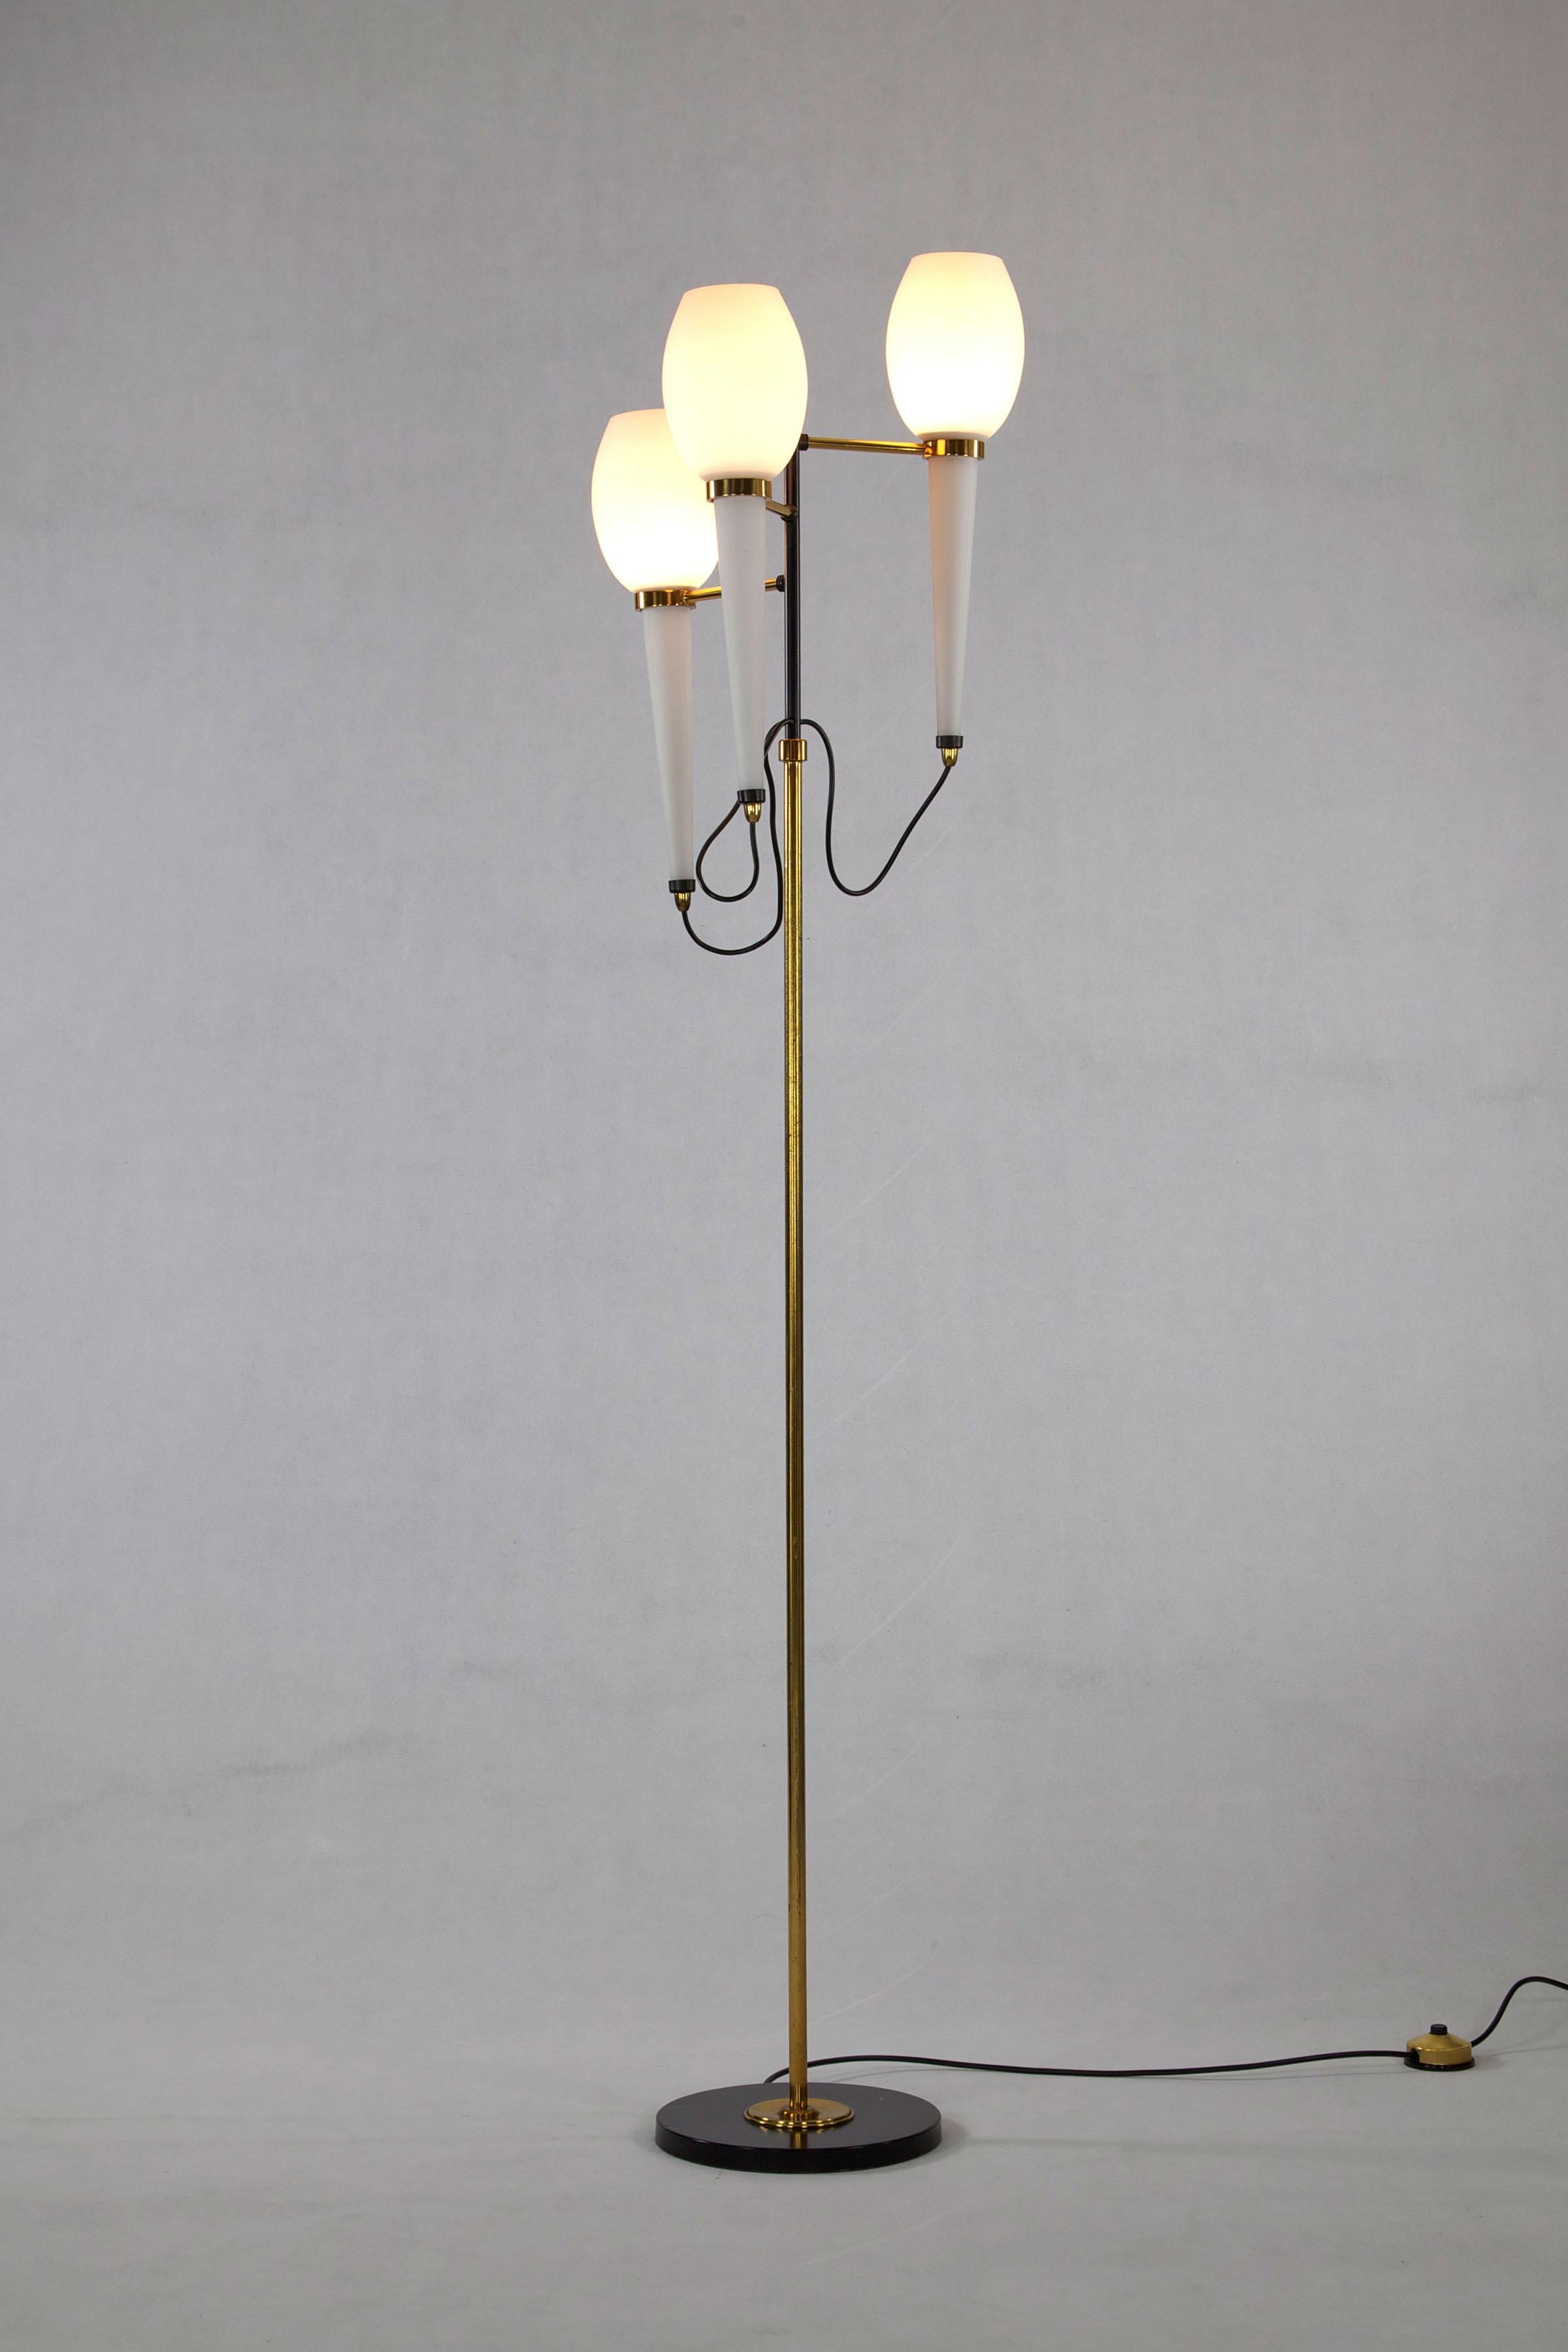 Set of 2 - Floor lamps, designed and manufactured by Stilnovo, Italy, 1950s. The lamps has three opaline glass tubes, as well as lacquered iron and brass frame with marble base.

Feel free to contact us for more detailed pictures.